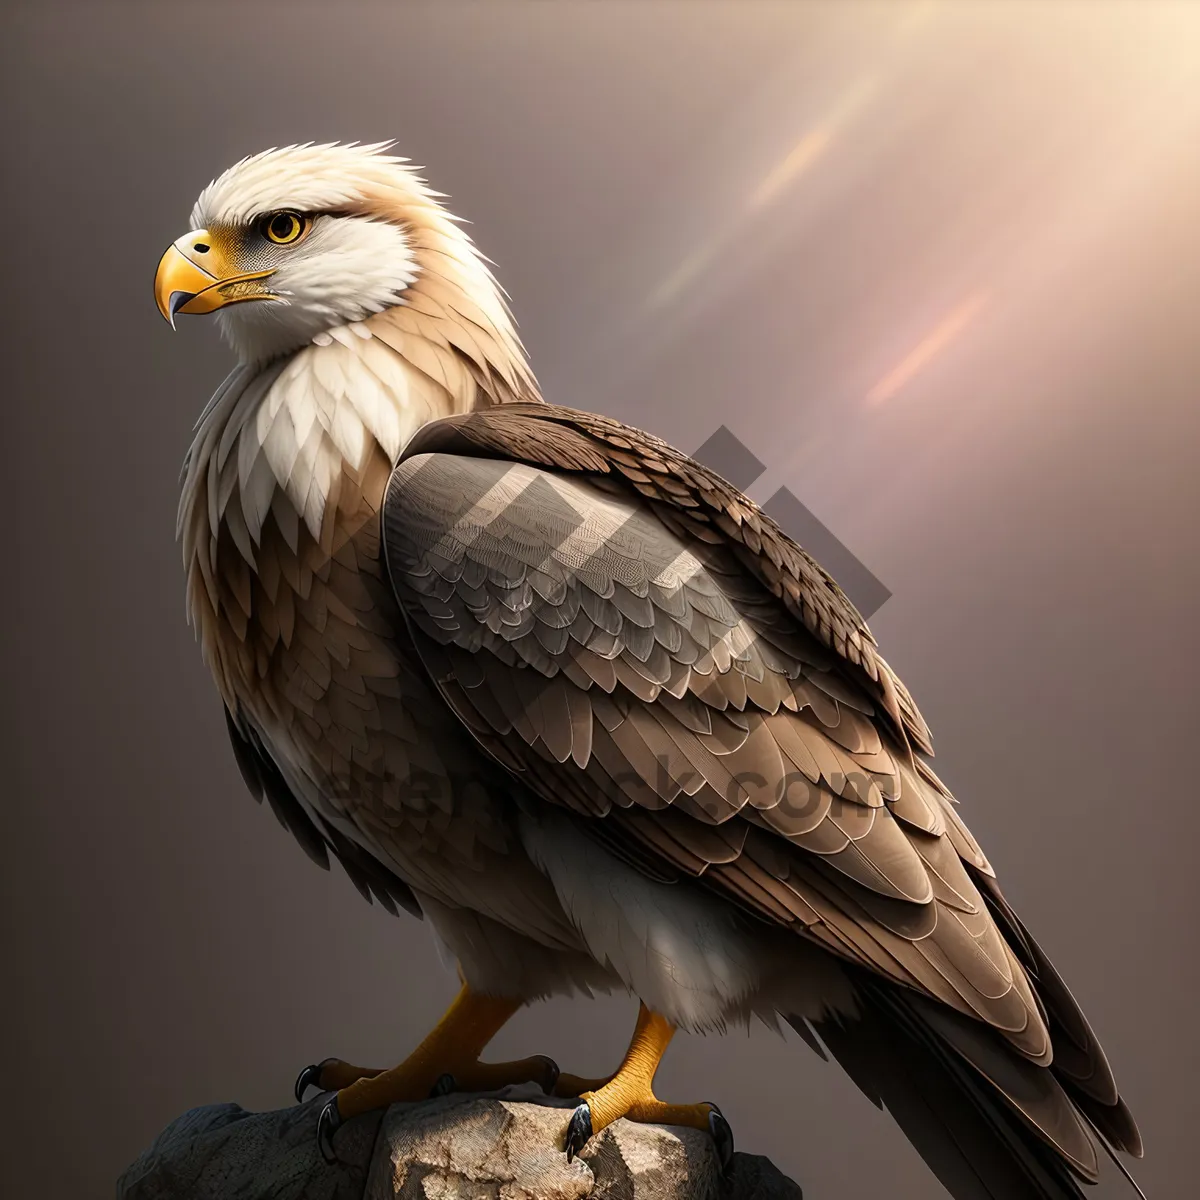 Picture of Brown Falcon with Piercing Gaze and Majestic Wings